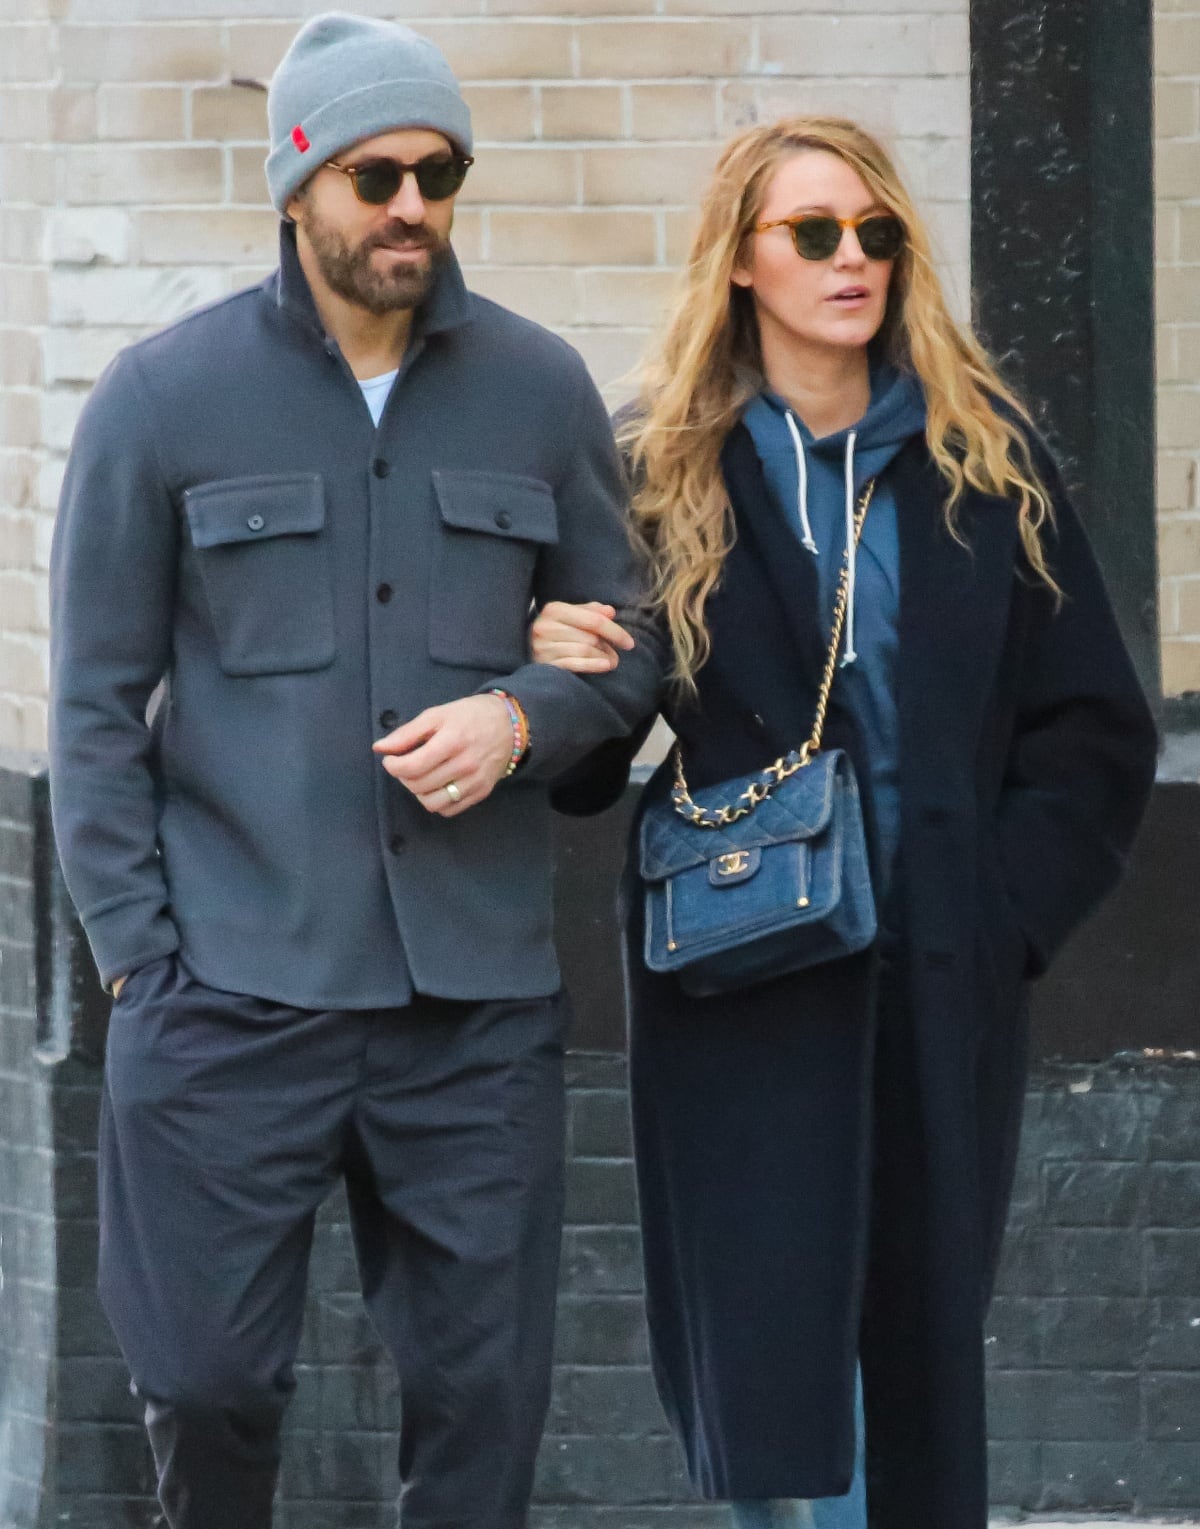 Ryan Reynolds and Blake Lively in shades of gray and blue while out running errands in New York City